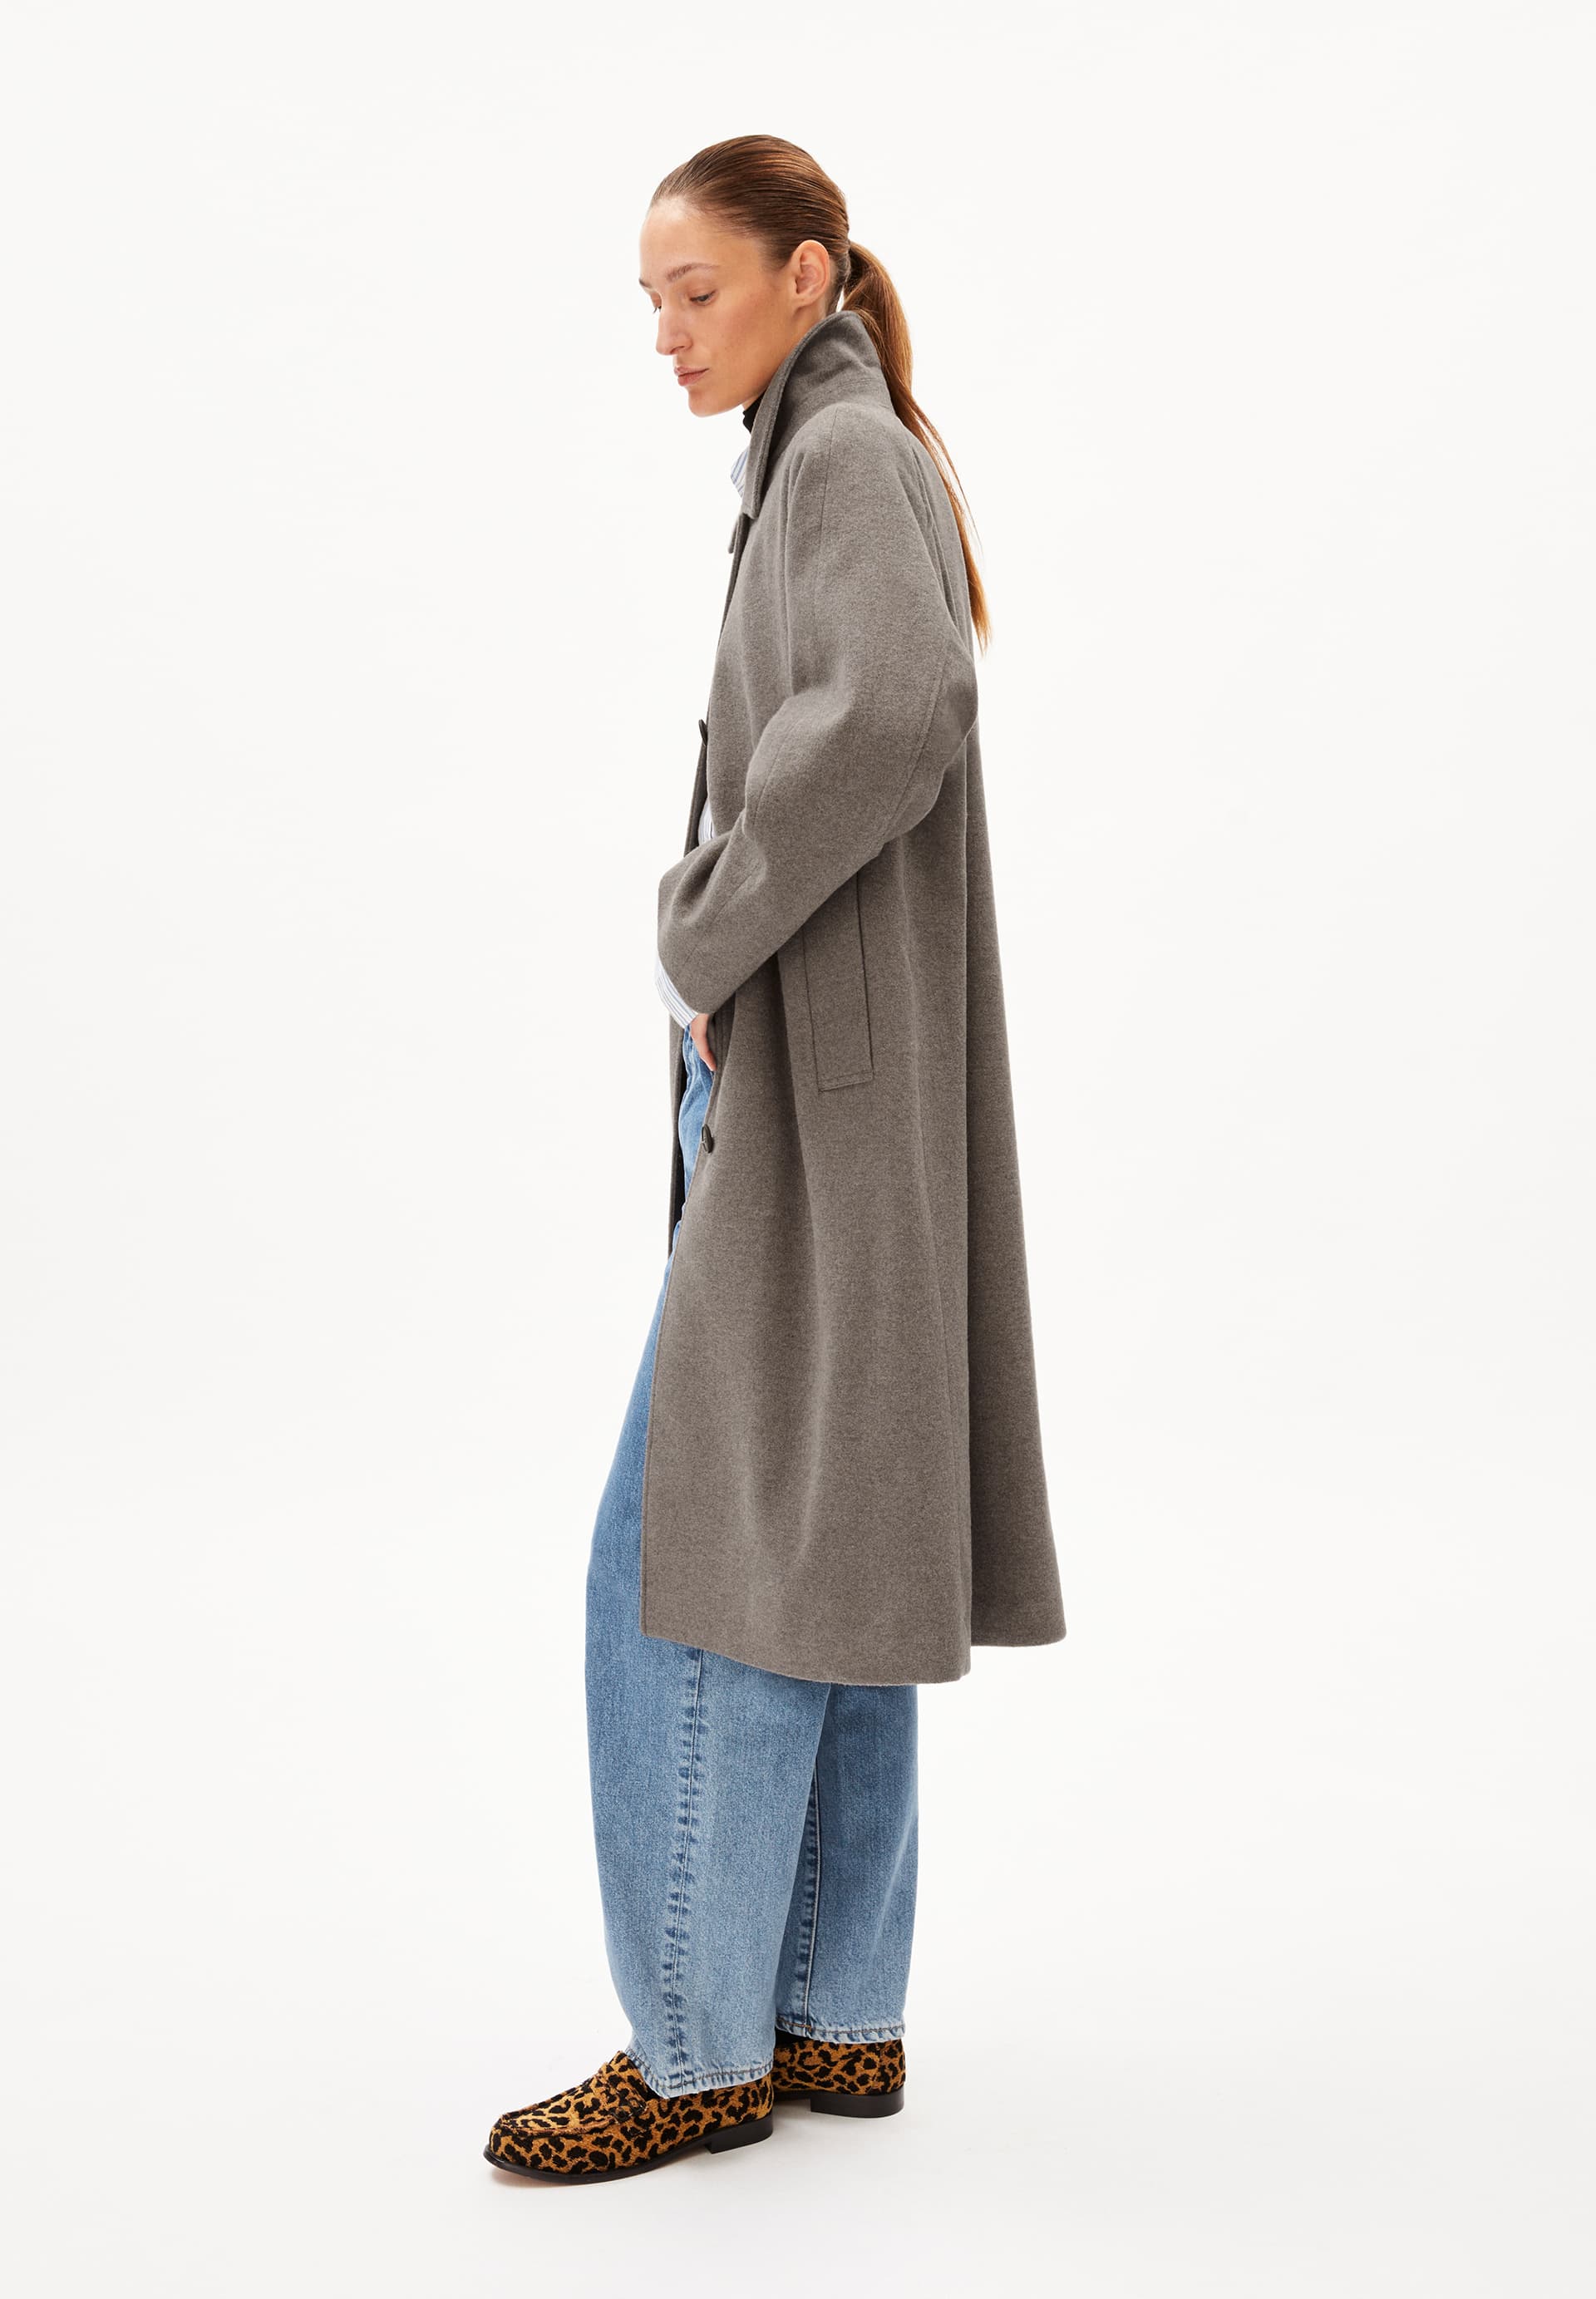 VAANOISE WOOL Mantel Relaxed Fit aus recycelter Wolle